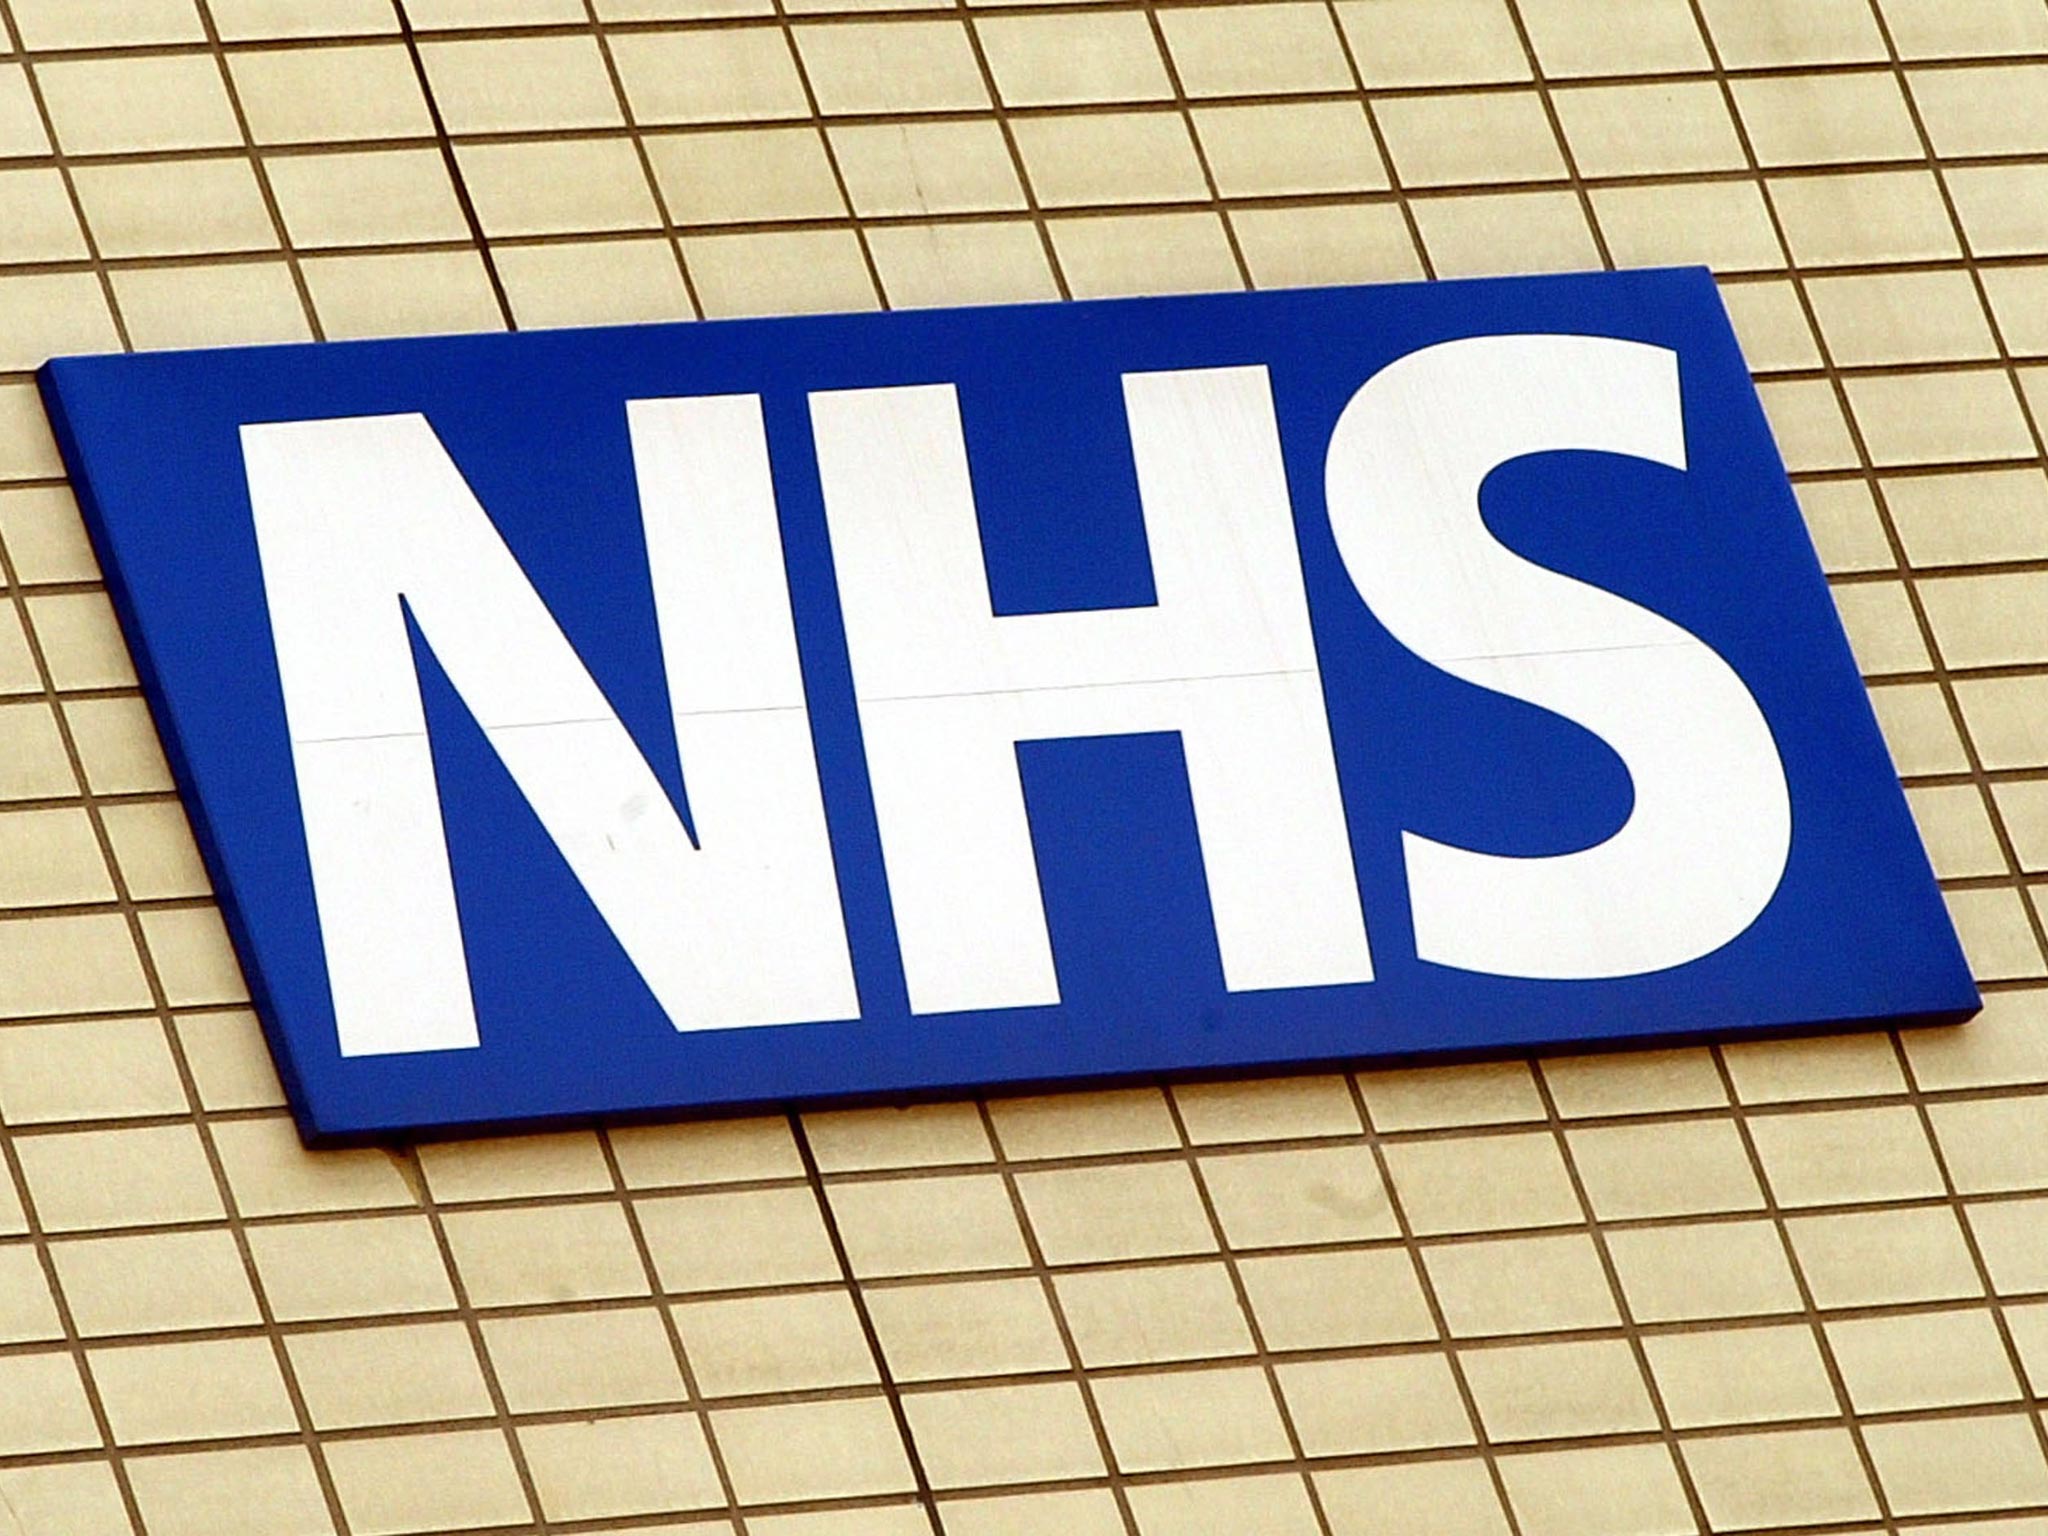 Political parties design health policy to 'score points over the Dispatch Box' rather than protect and improve the NHS, doctors have said, after a poll found two-thirds of people want it taken out of the hands of politicians